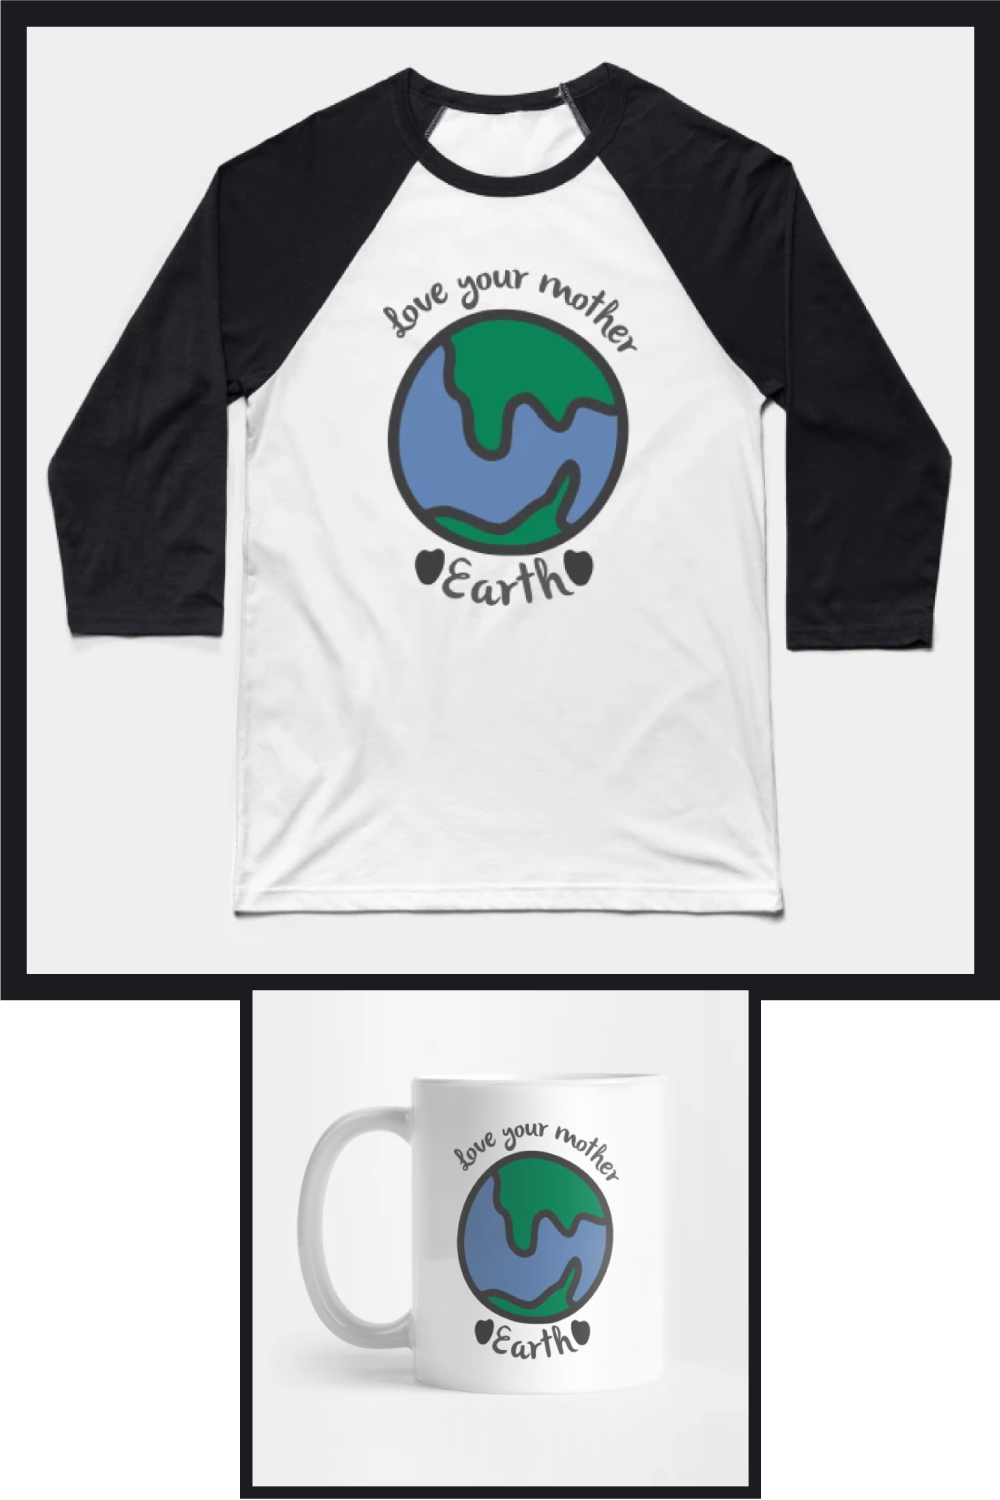 Love your mother earth - t-shirt design vector illustration pinterest preview image.